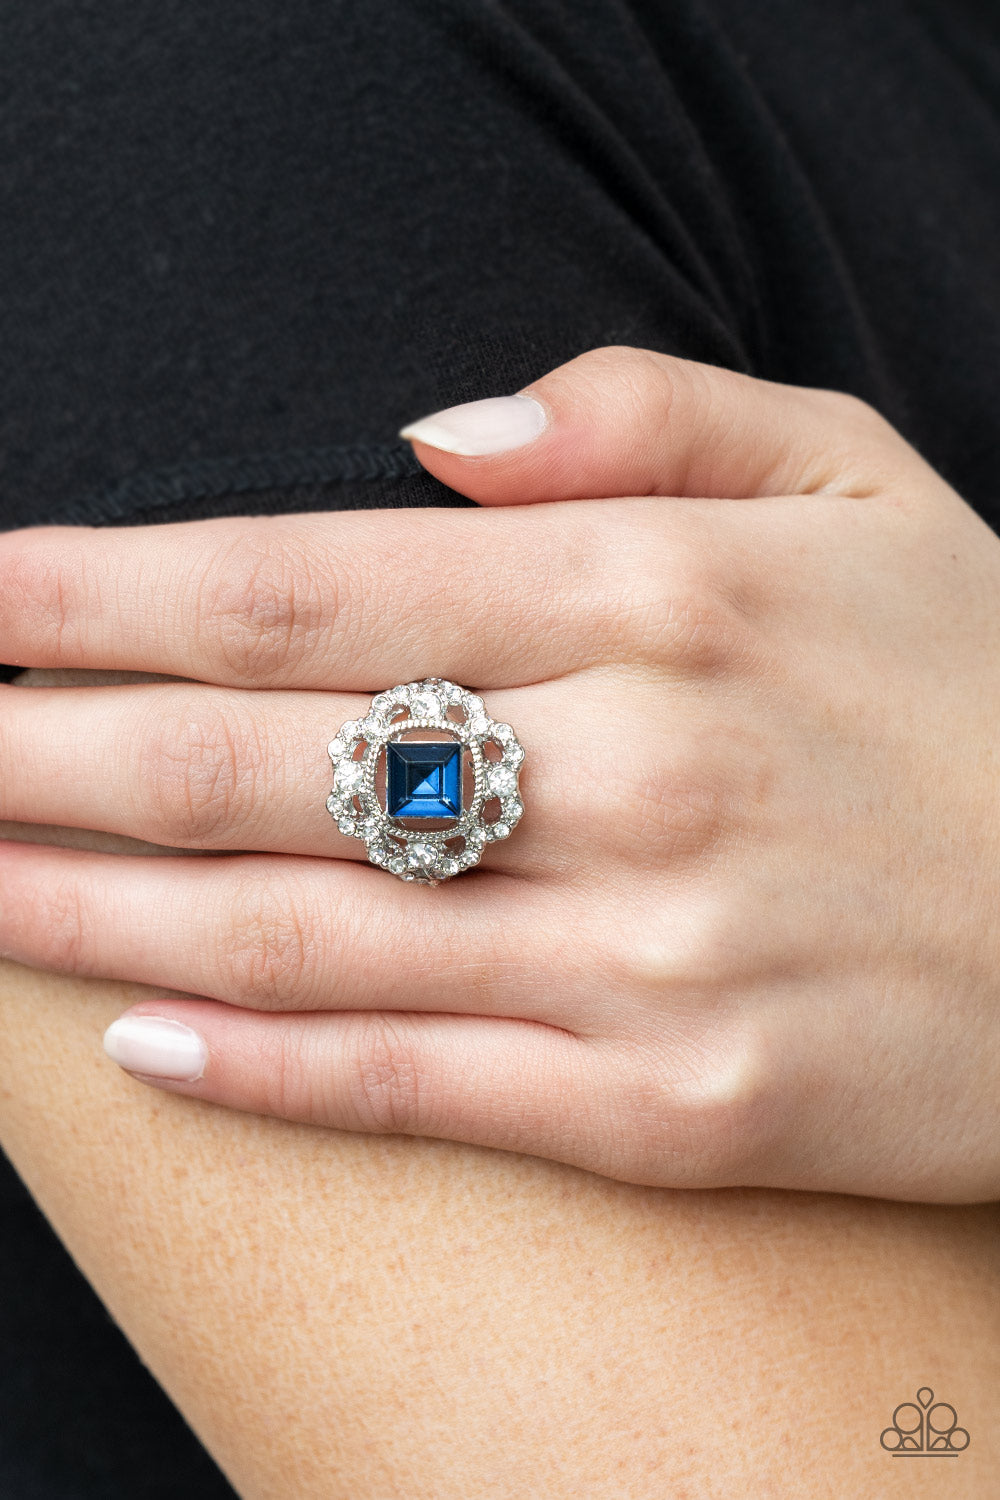 PRE-ORDER - Paparazzi Candid Charisma - Blue - Ring - $5 Jewelry with Ashley Swint